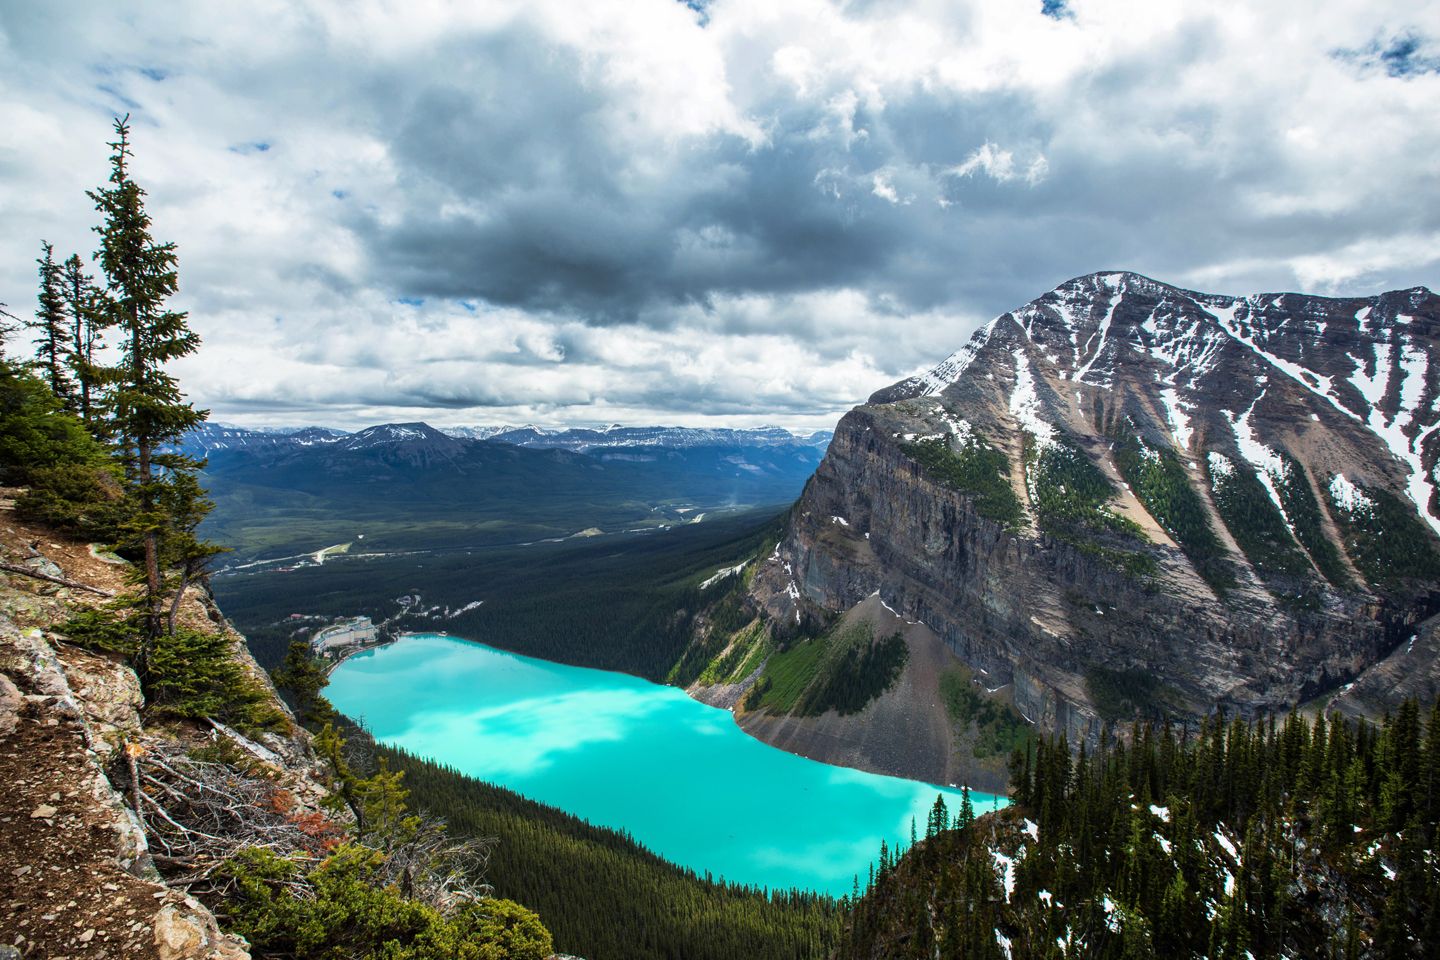 Everything you need to know about Lake Louise and its surrounding